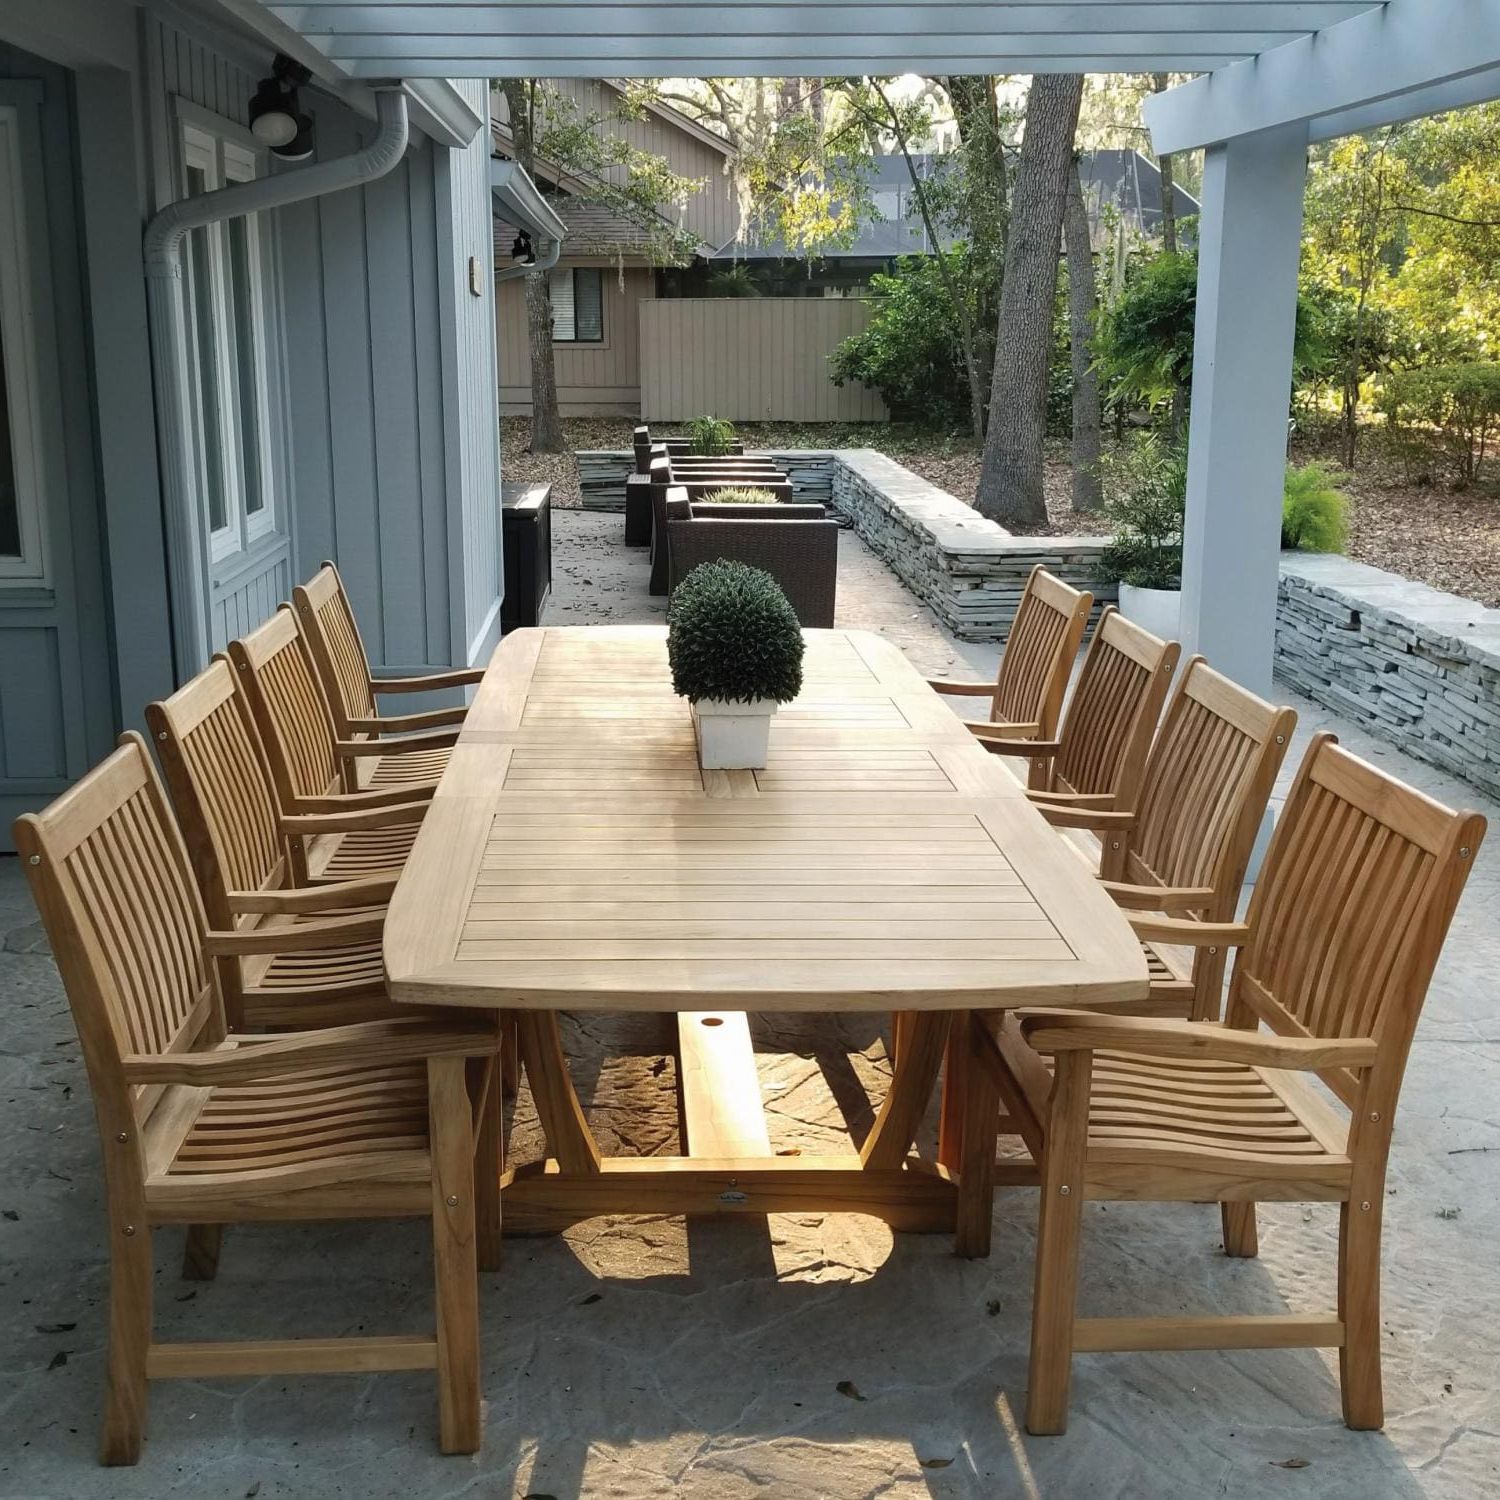 Compass 9 Piece Teak Patio Dining Set W/ 84 X 43 Inch Rectangular With Regard To Most Recently Released 9 Piece Patio Dining Sets (View 3 of 15)